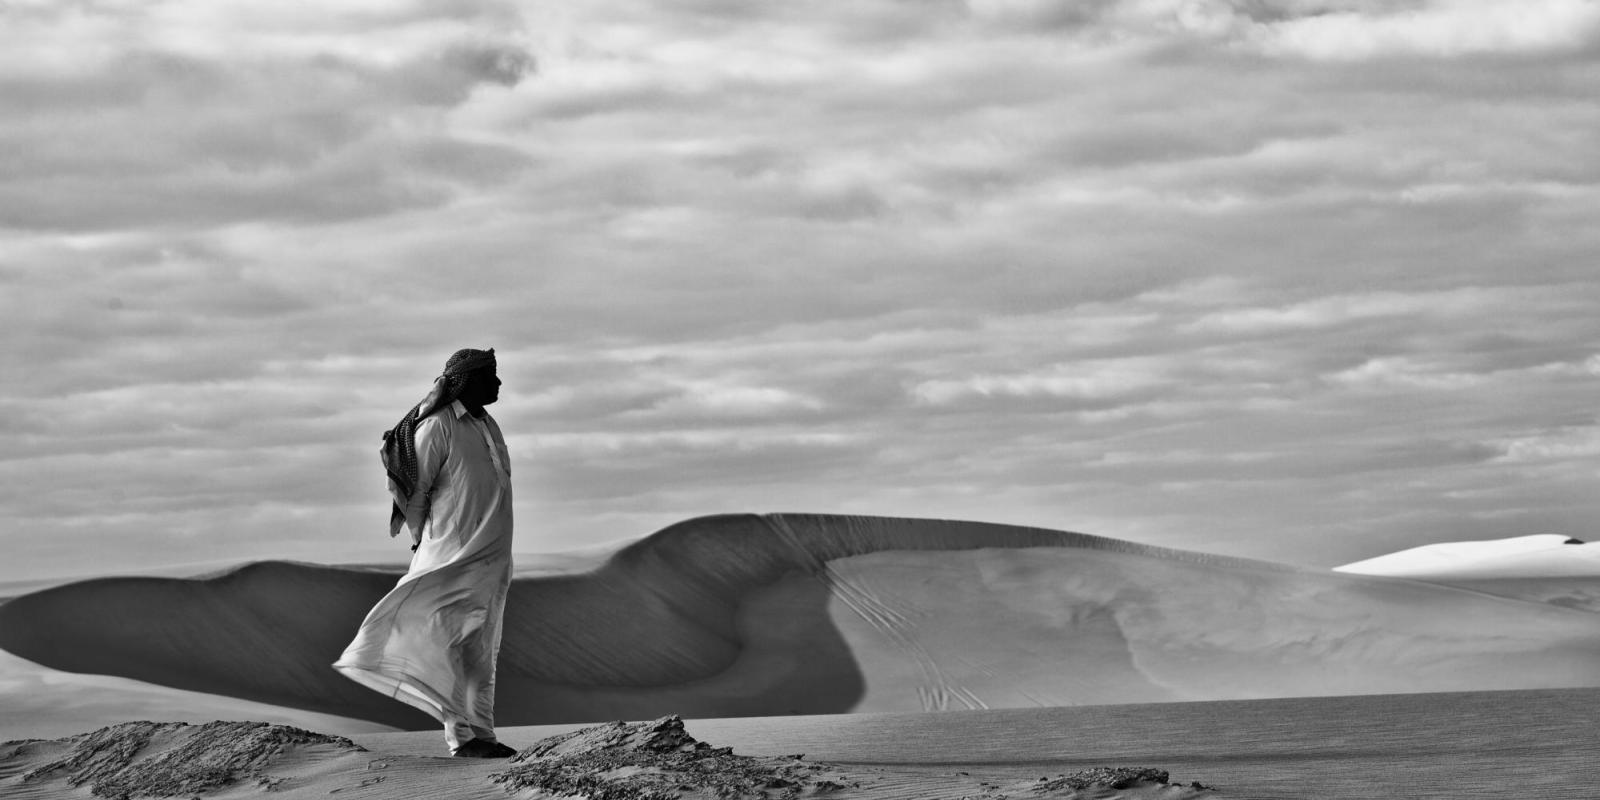 Monochrome Exhibit Captures Life in Egypt in Black and White; View ...